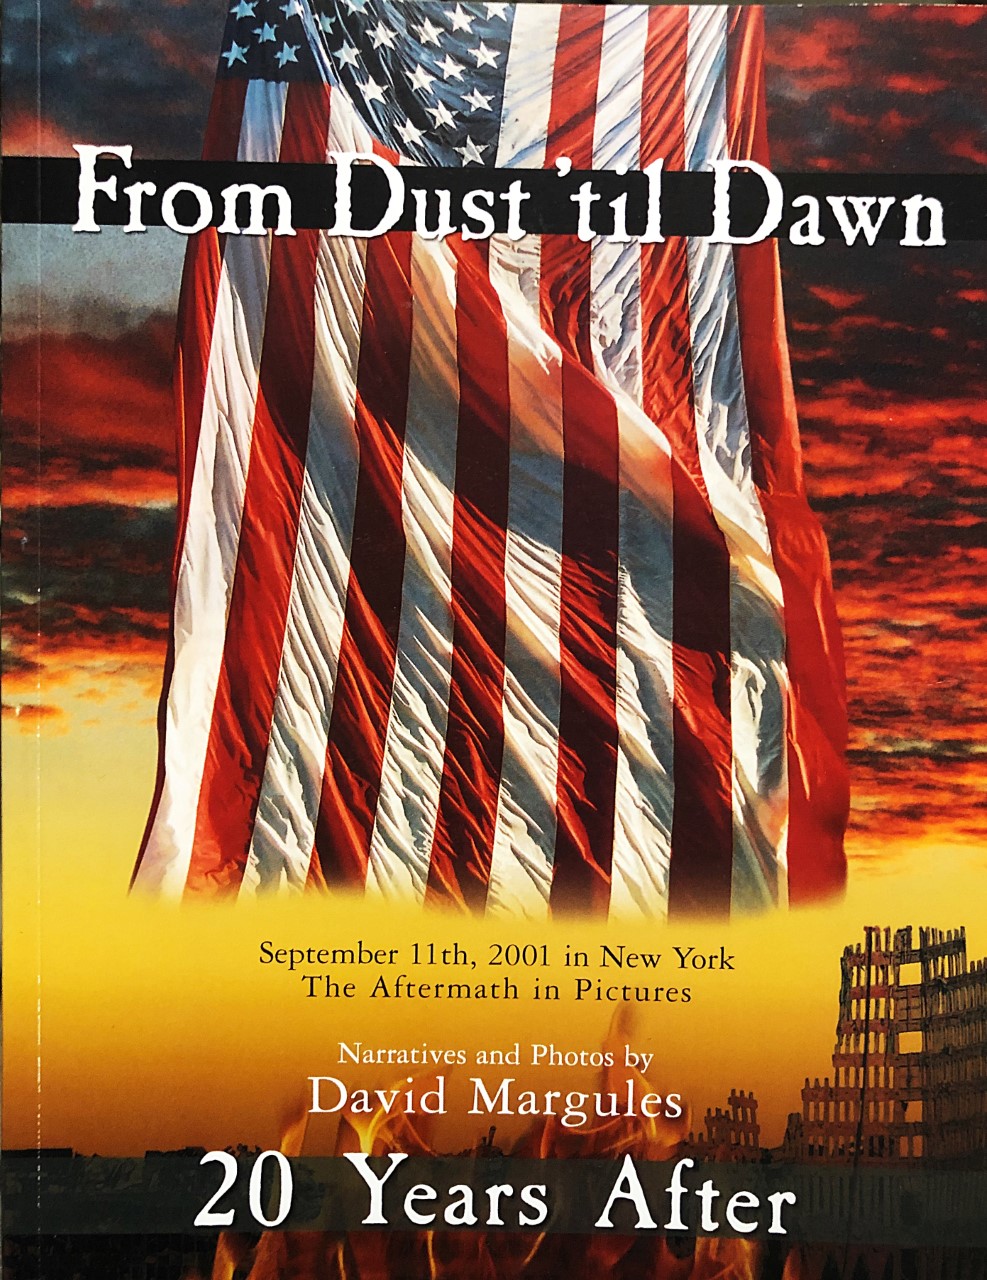 Book cover shows the American flag hanging vertically against a fiery sky